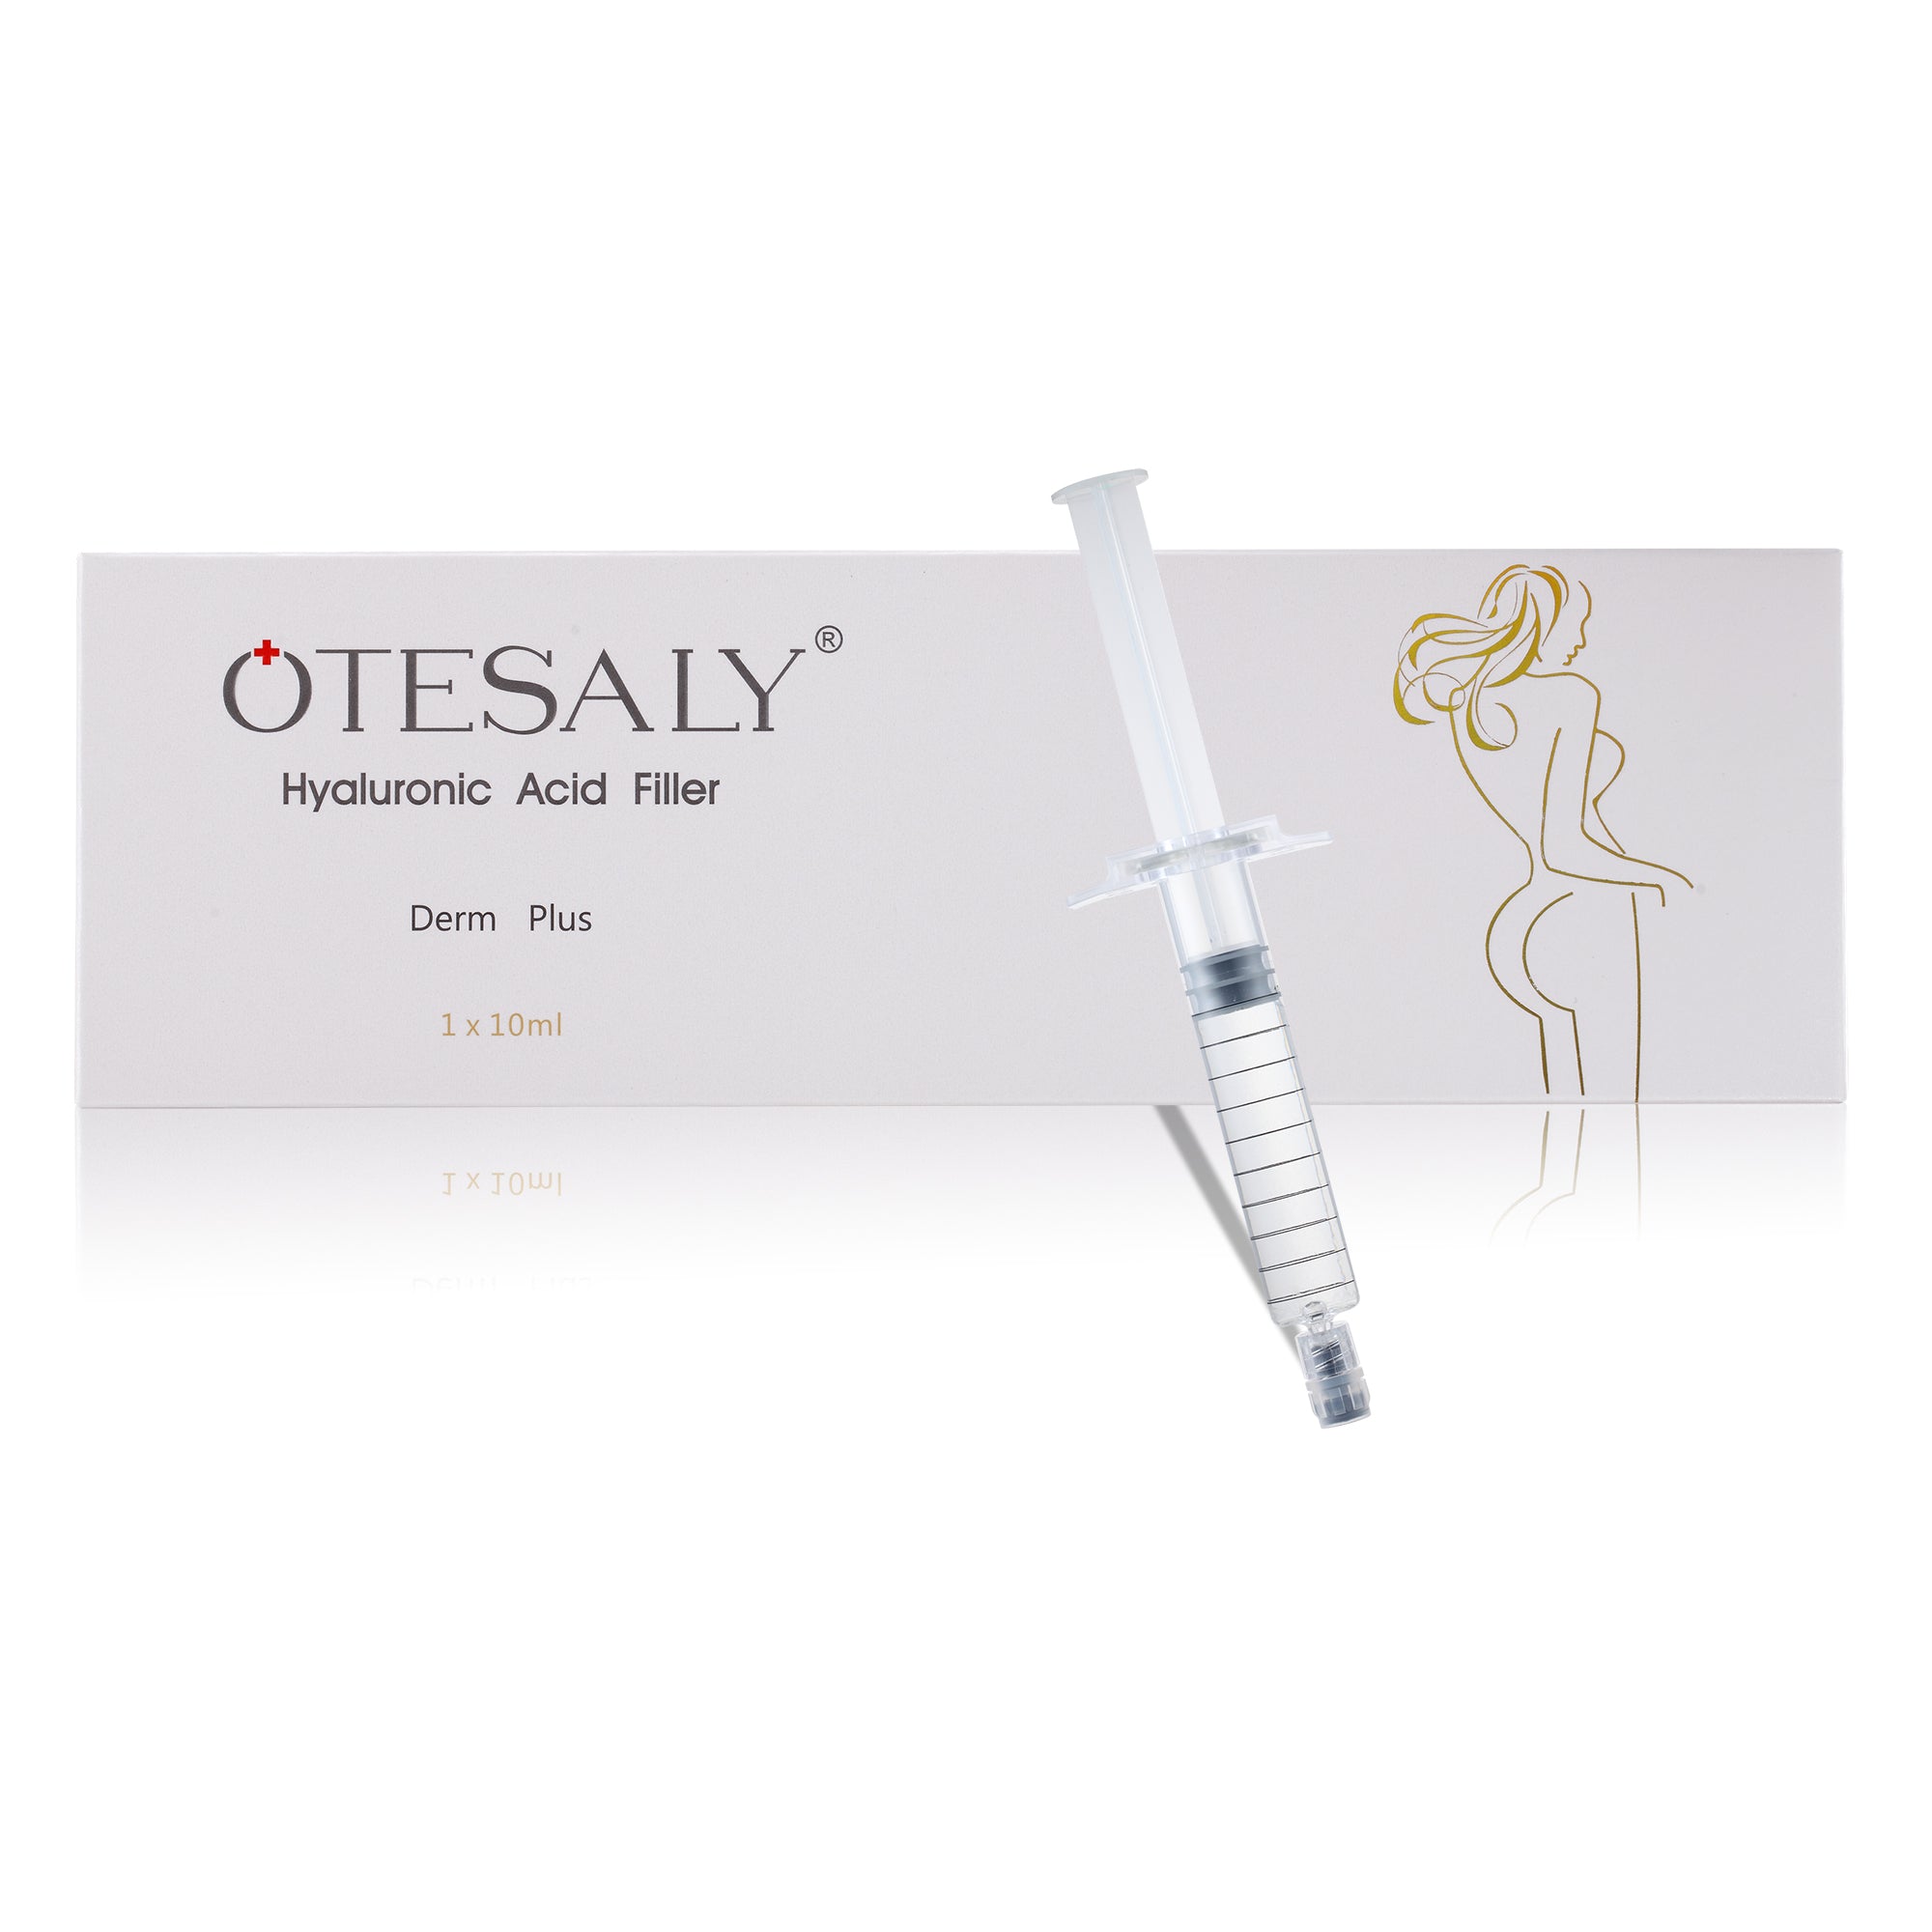 Otesaly Dermal Filler for breast and buttocks